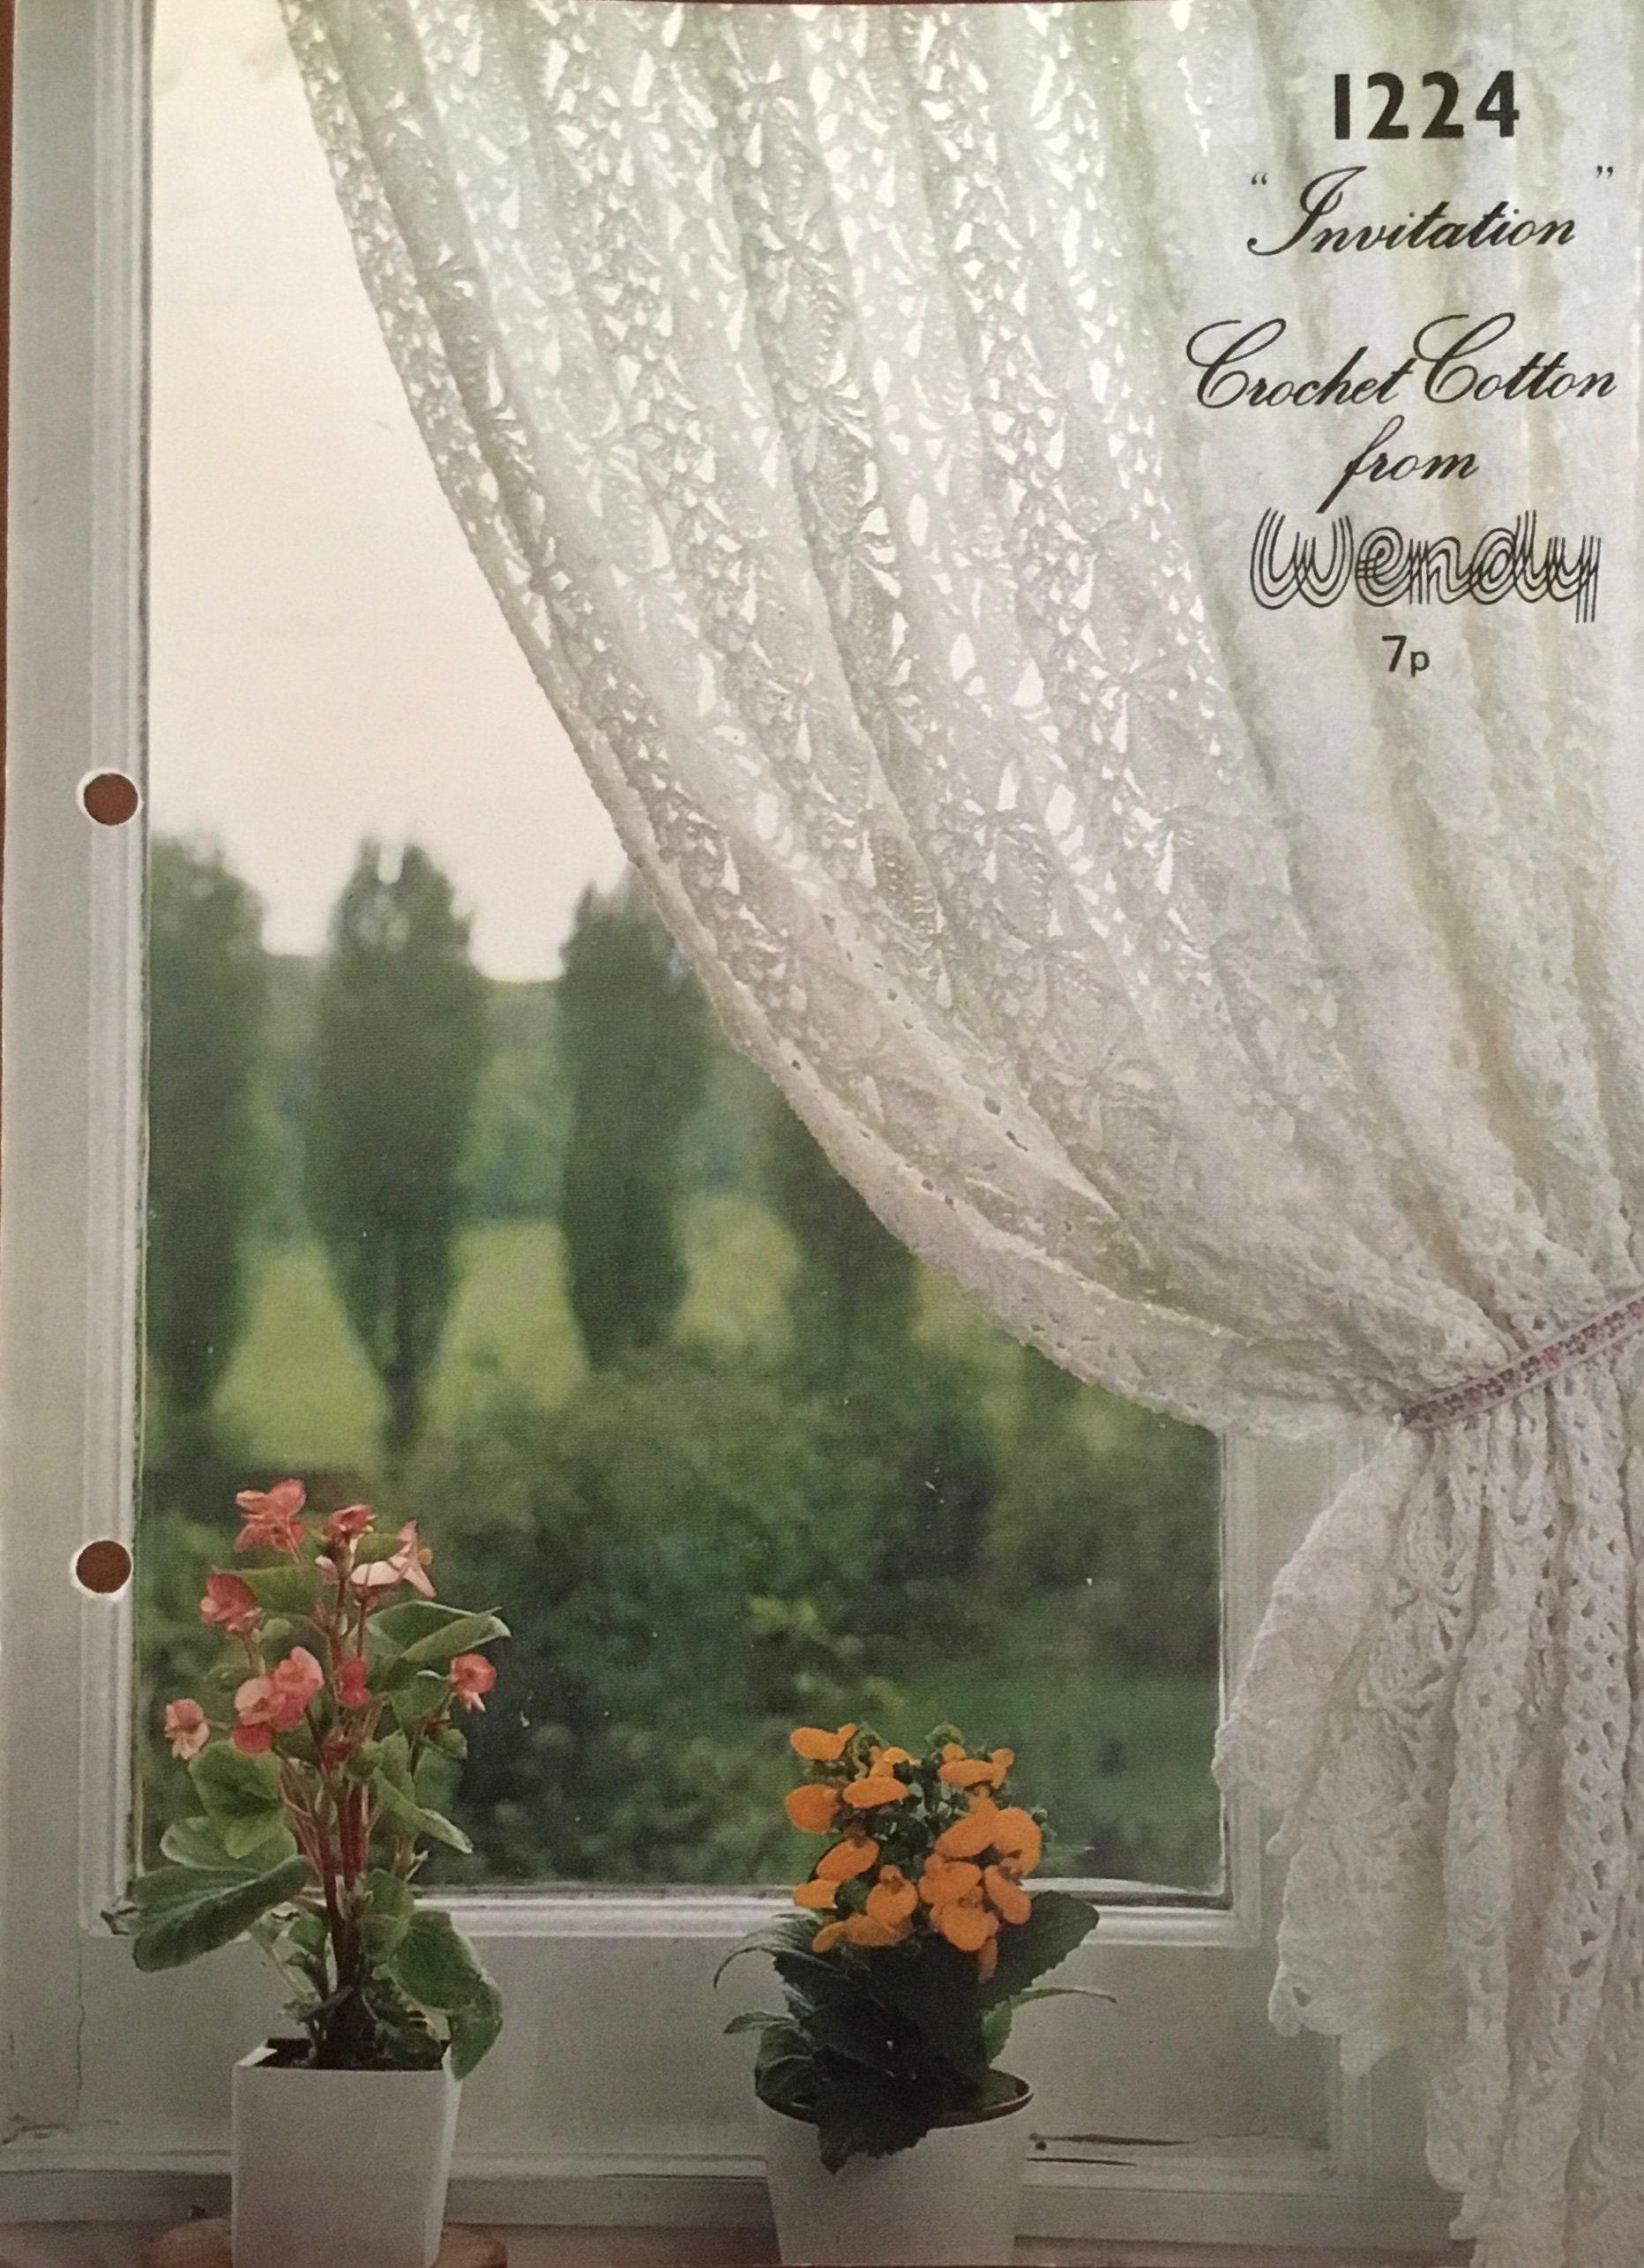 Wendy Lace Curtain Crochet Pattern No. 1224 Instructions for - Etsy India